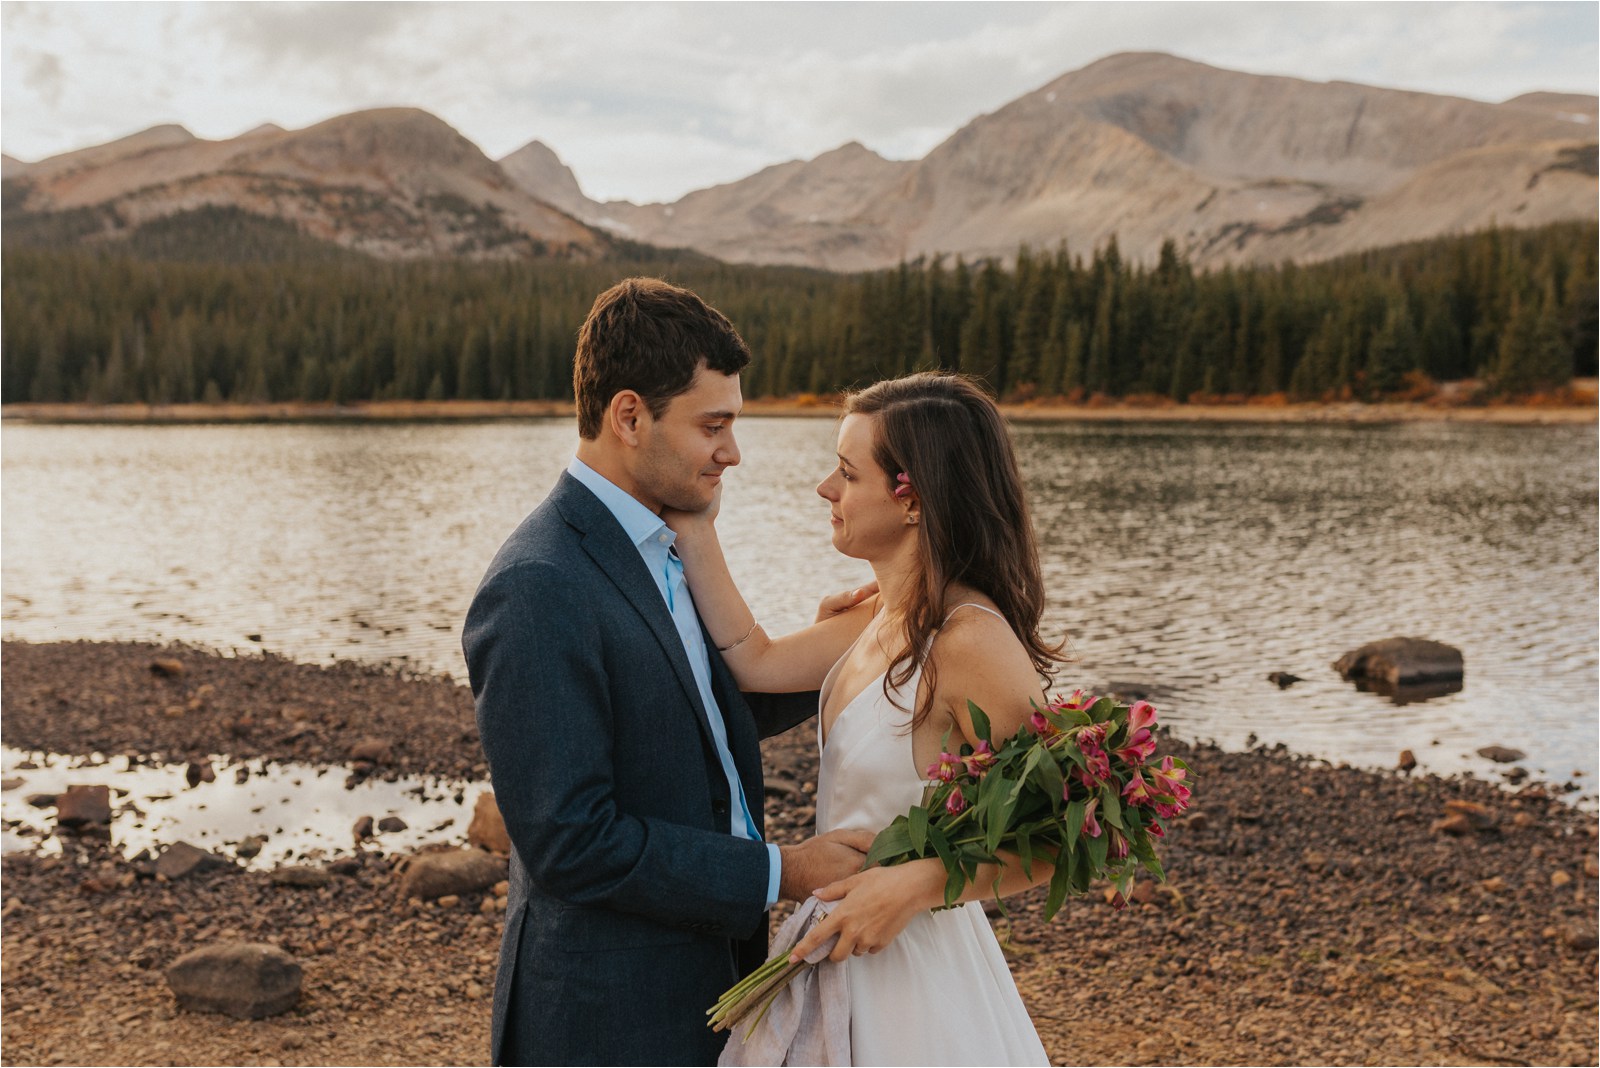 An emotional bride and groom embracing one another during their elopement in Colorado in front of a lake, with trees and snow-capped mountains in the distance.